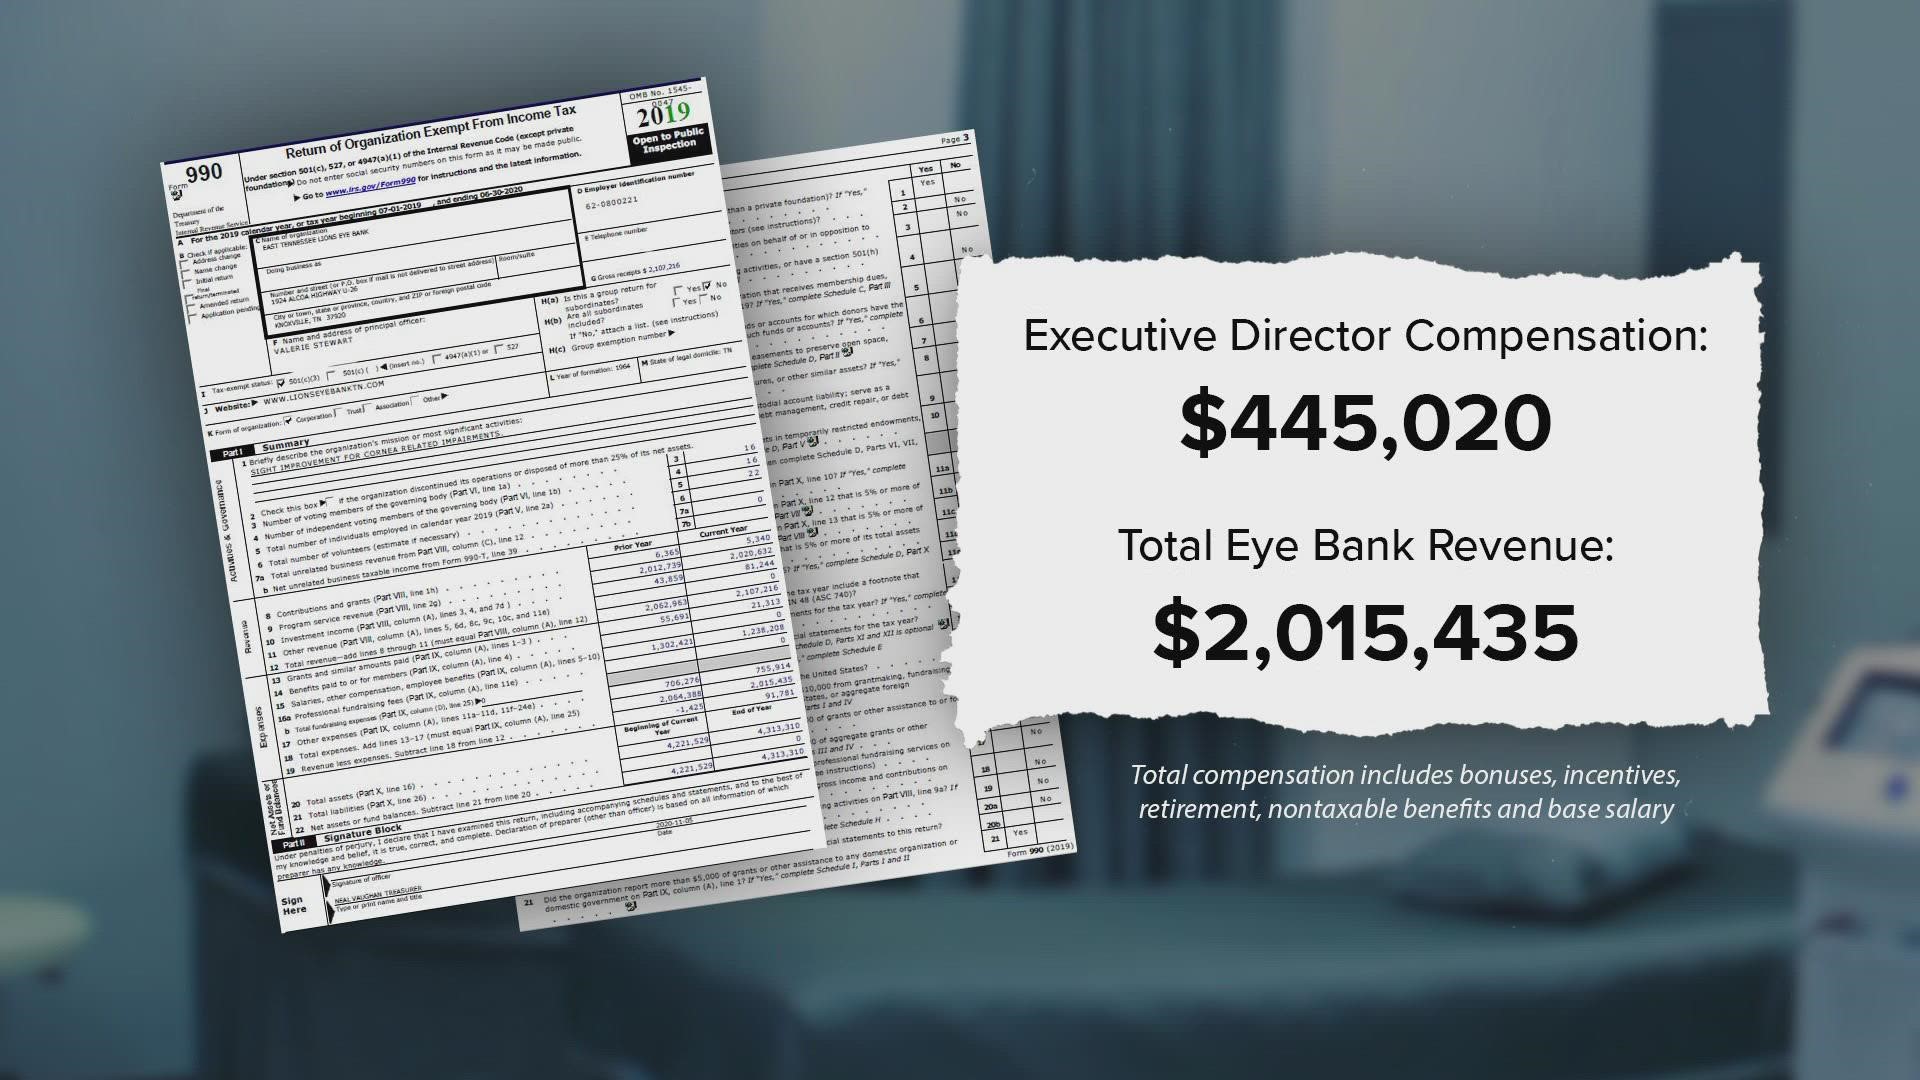 The executive director of the East Tennessee Lions Eye Bank is paid more than $445,000 — around 20% of the organization's reported revenue.